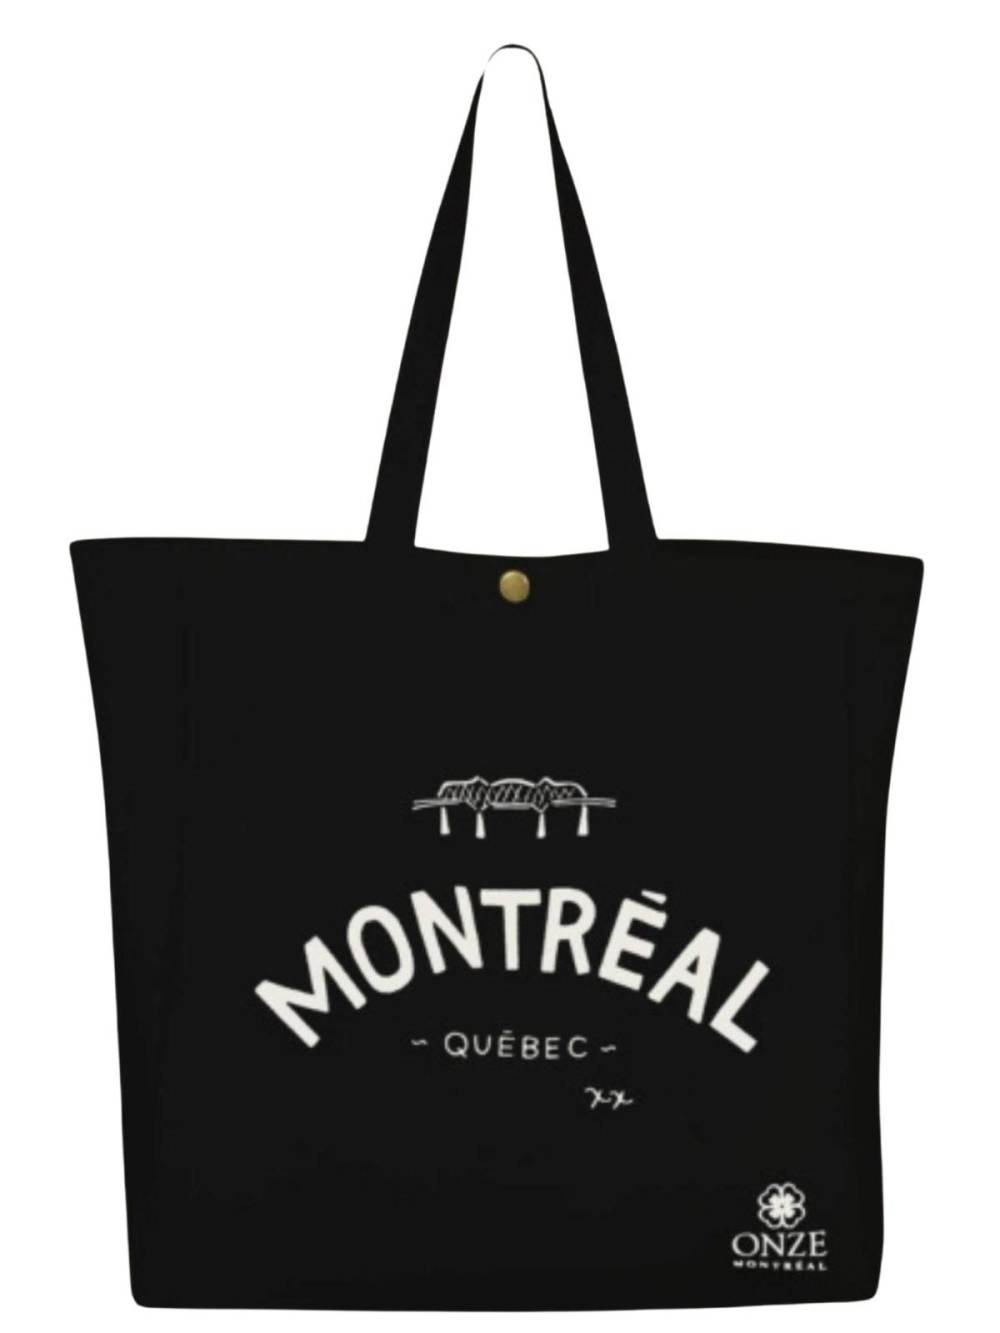 Annick - Montreal Quebec Illustration Canvas Tote